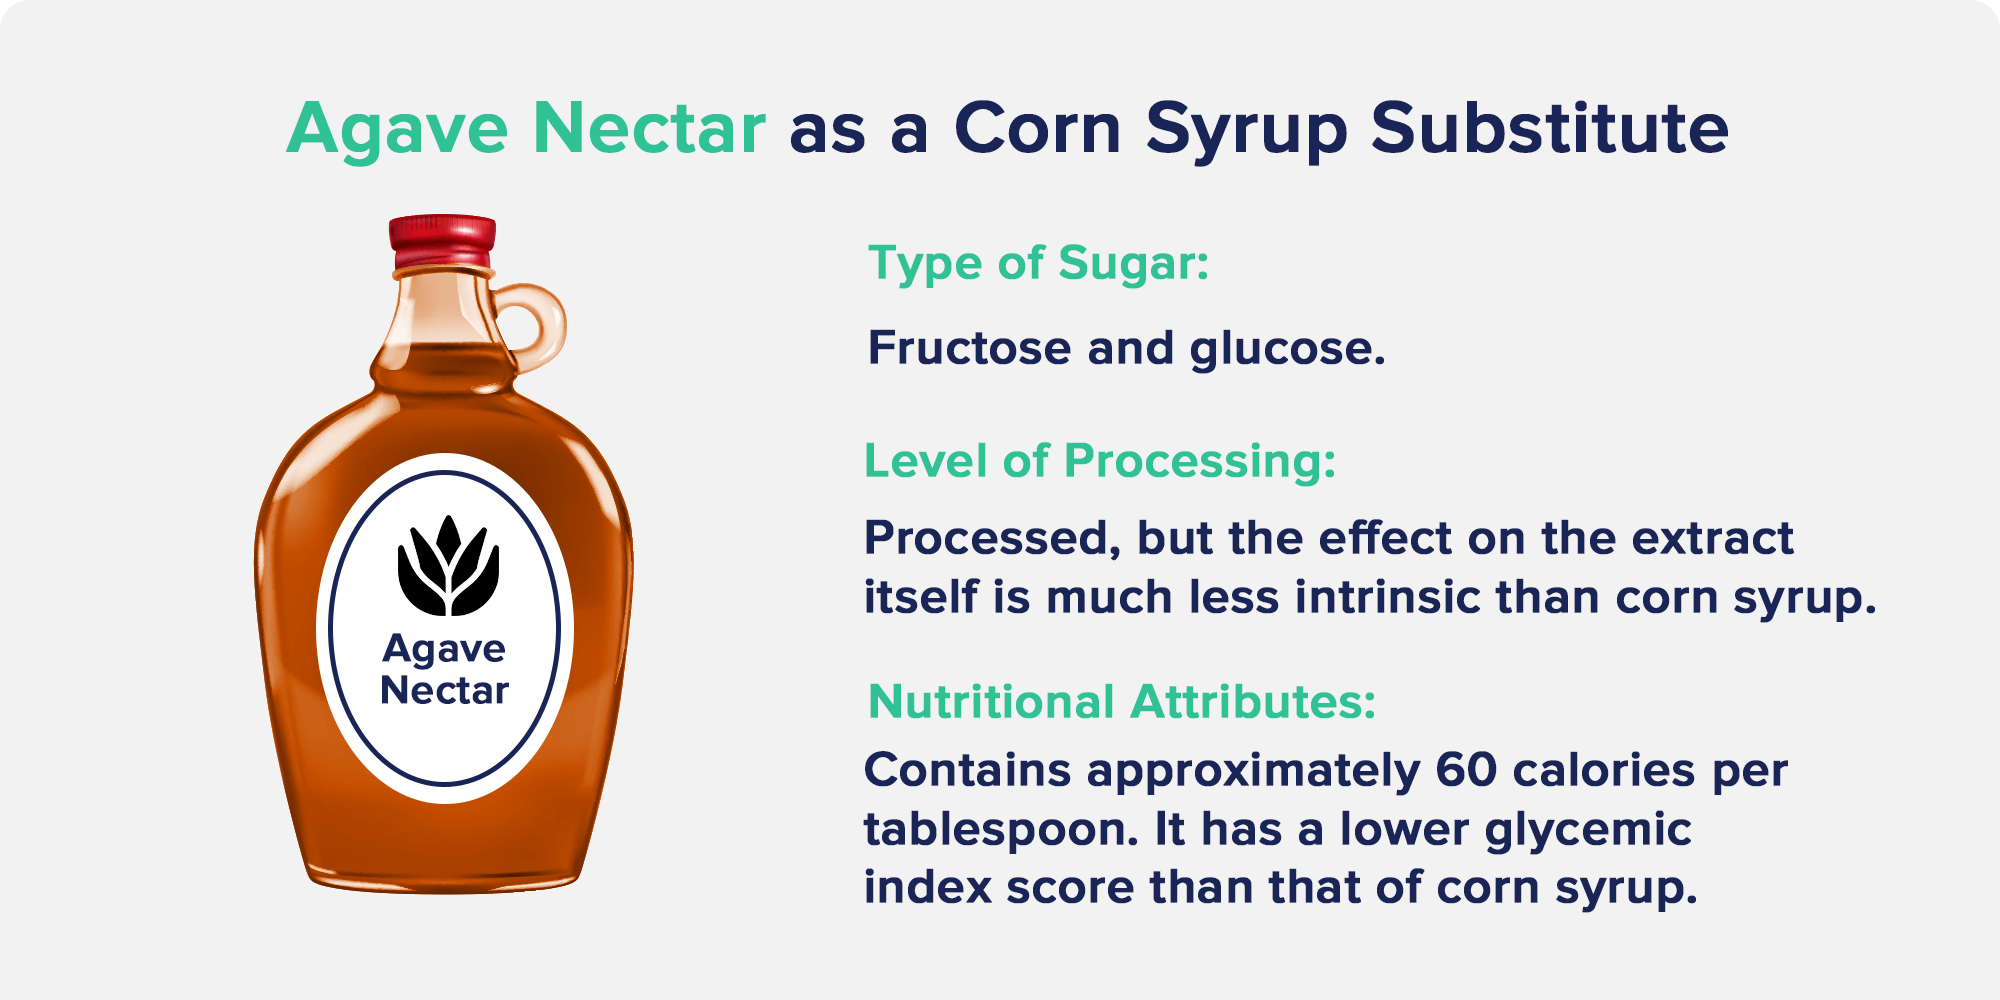 Agave Nectar as a Corn Syrup Substitute